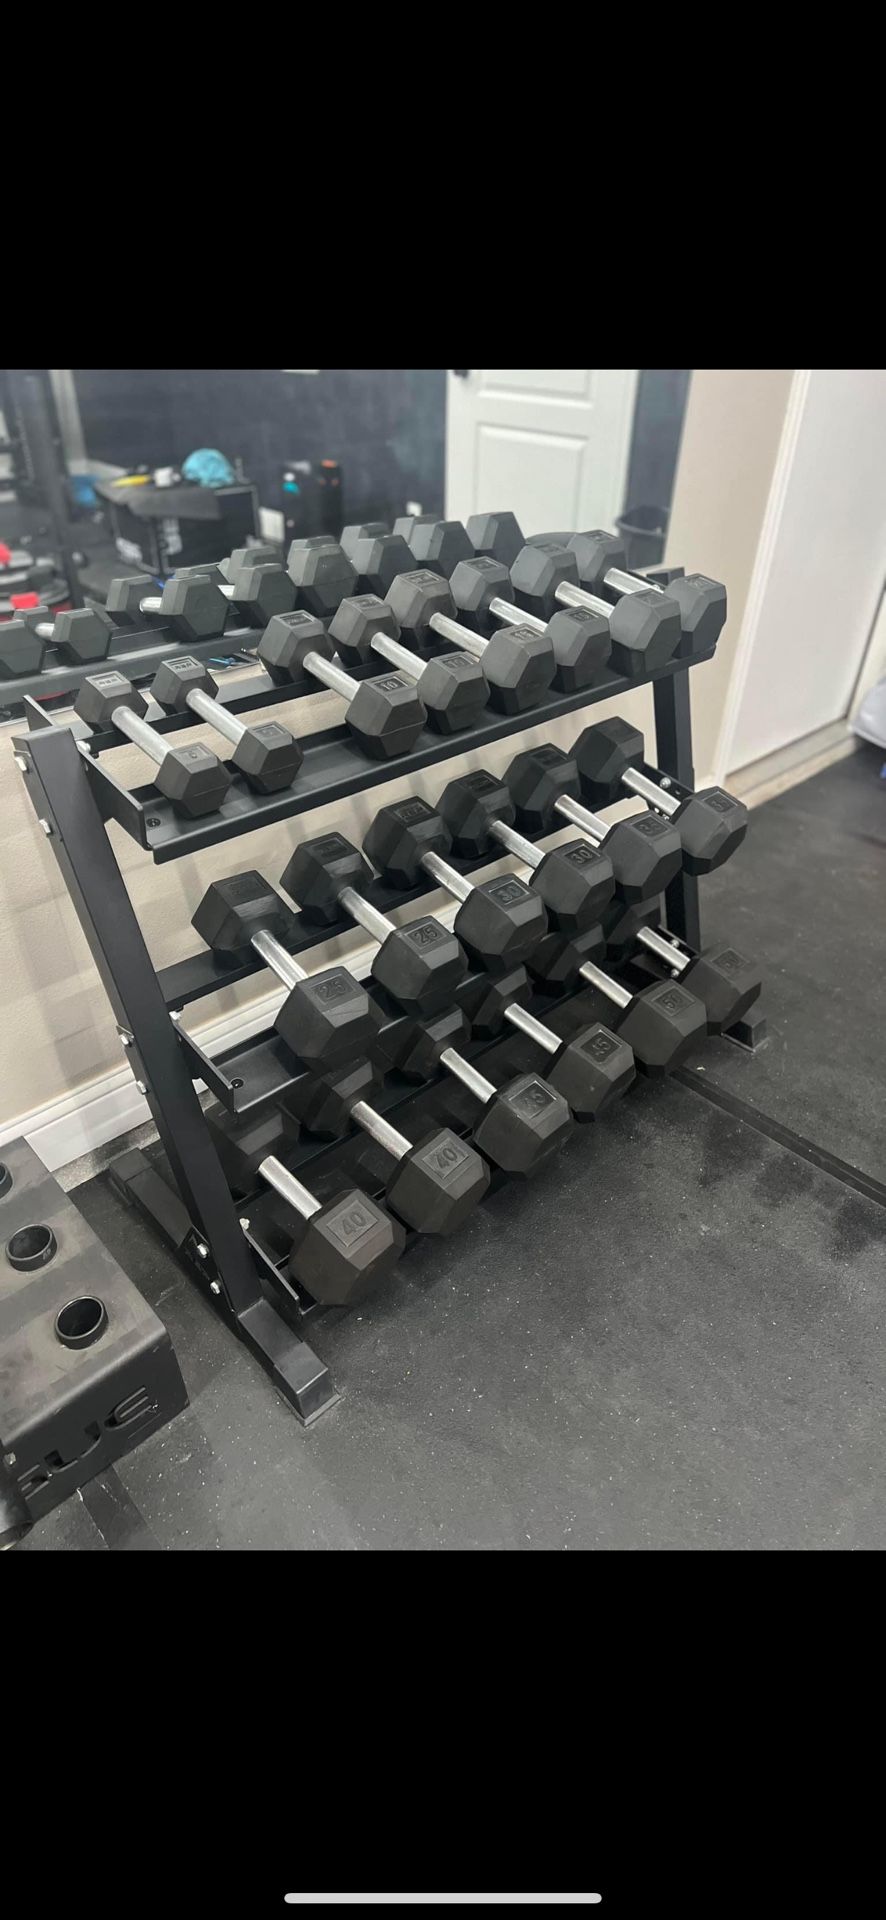 REP Dumbbell Set 5-50lbs with Rack